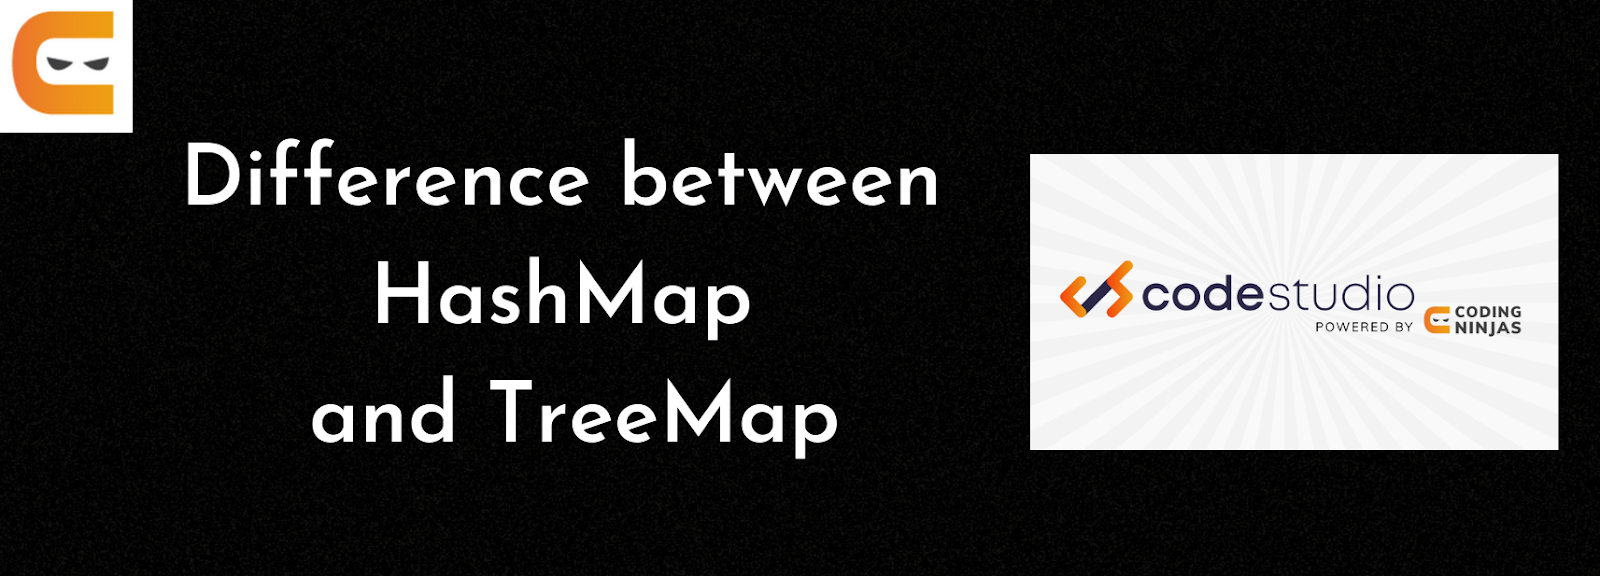 Difference Between Hashmap And Treemap 0 1665236379 